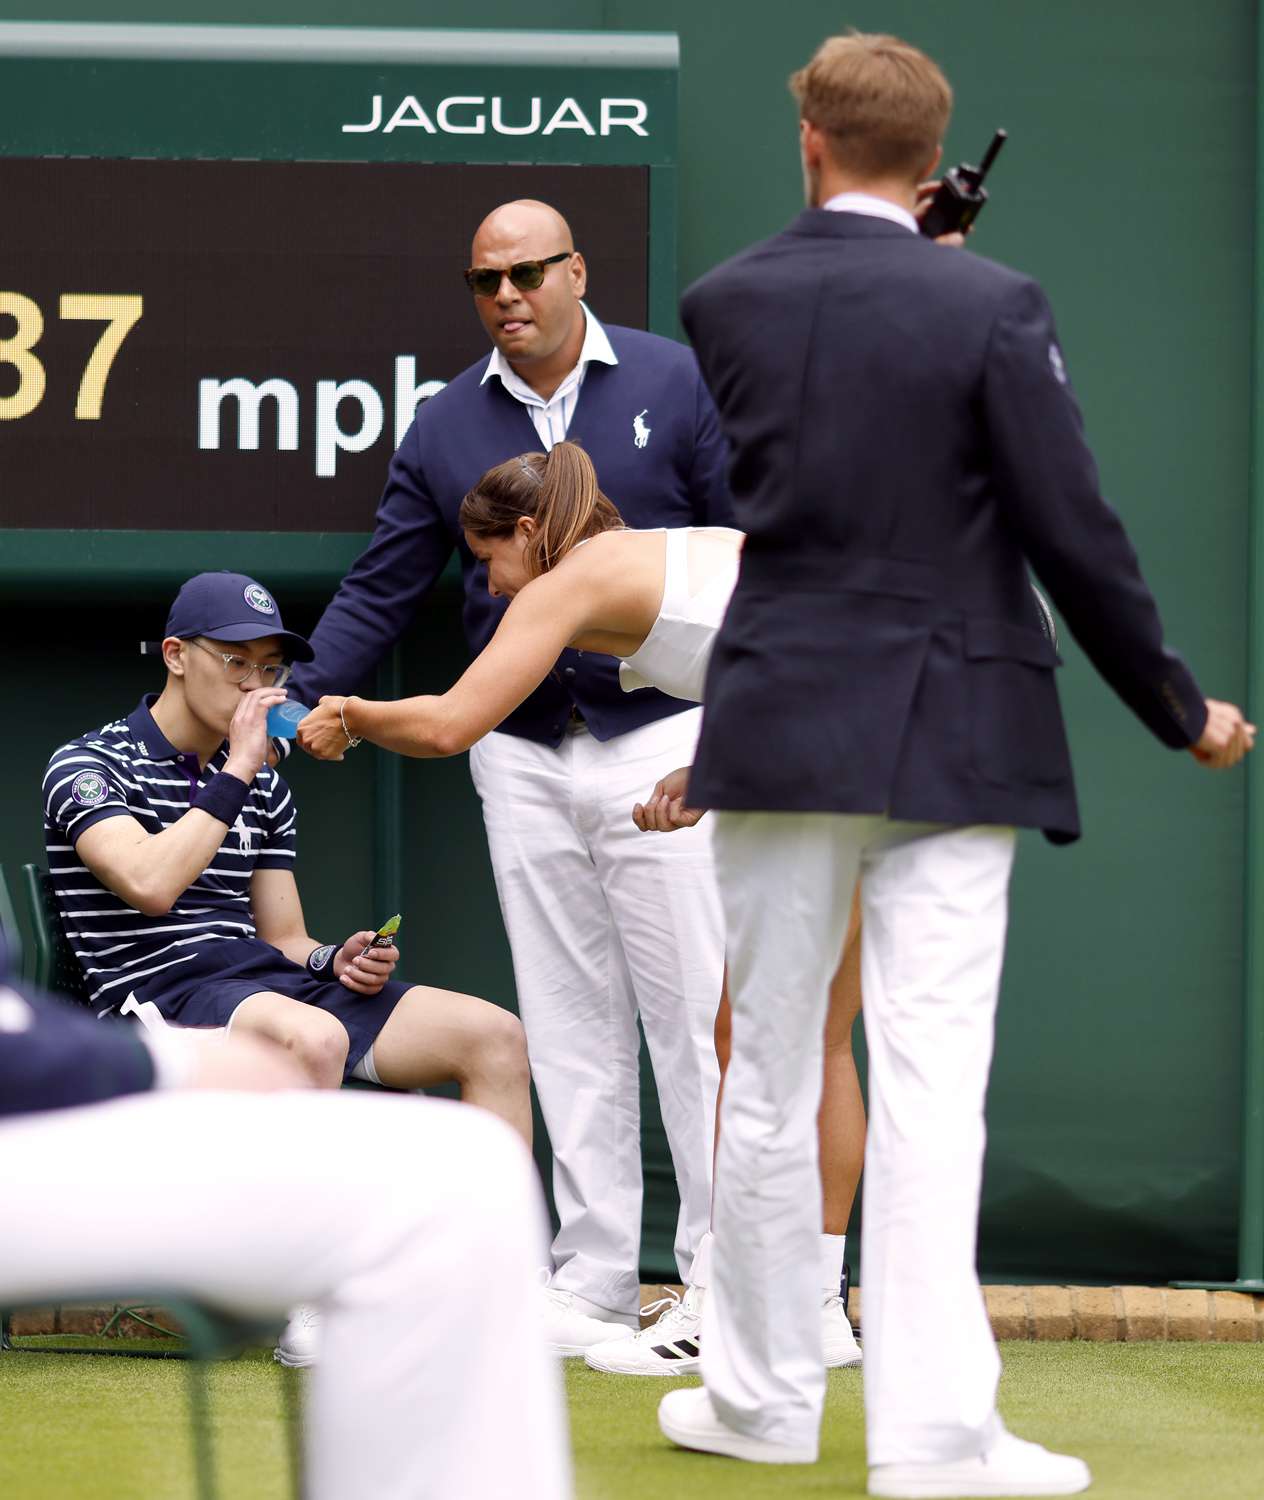 Wimbledon Match Stopped as British Player Jodie Burrage Rushes to Help Fainting Ball Boy